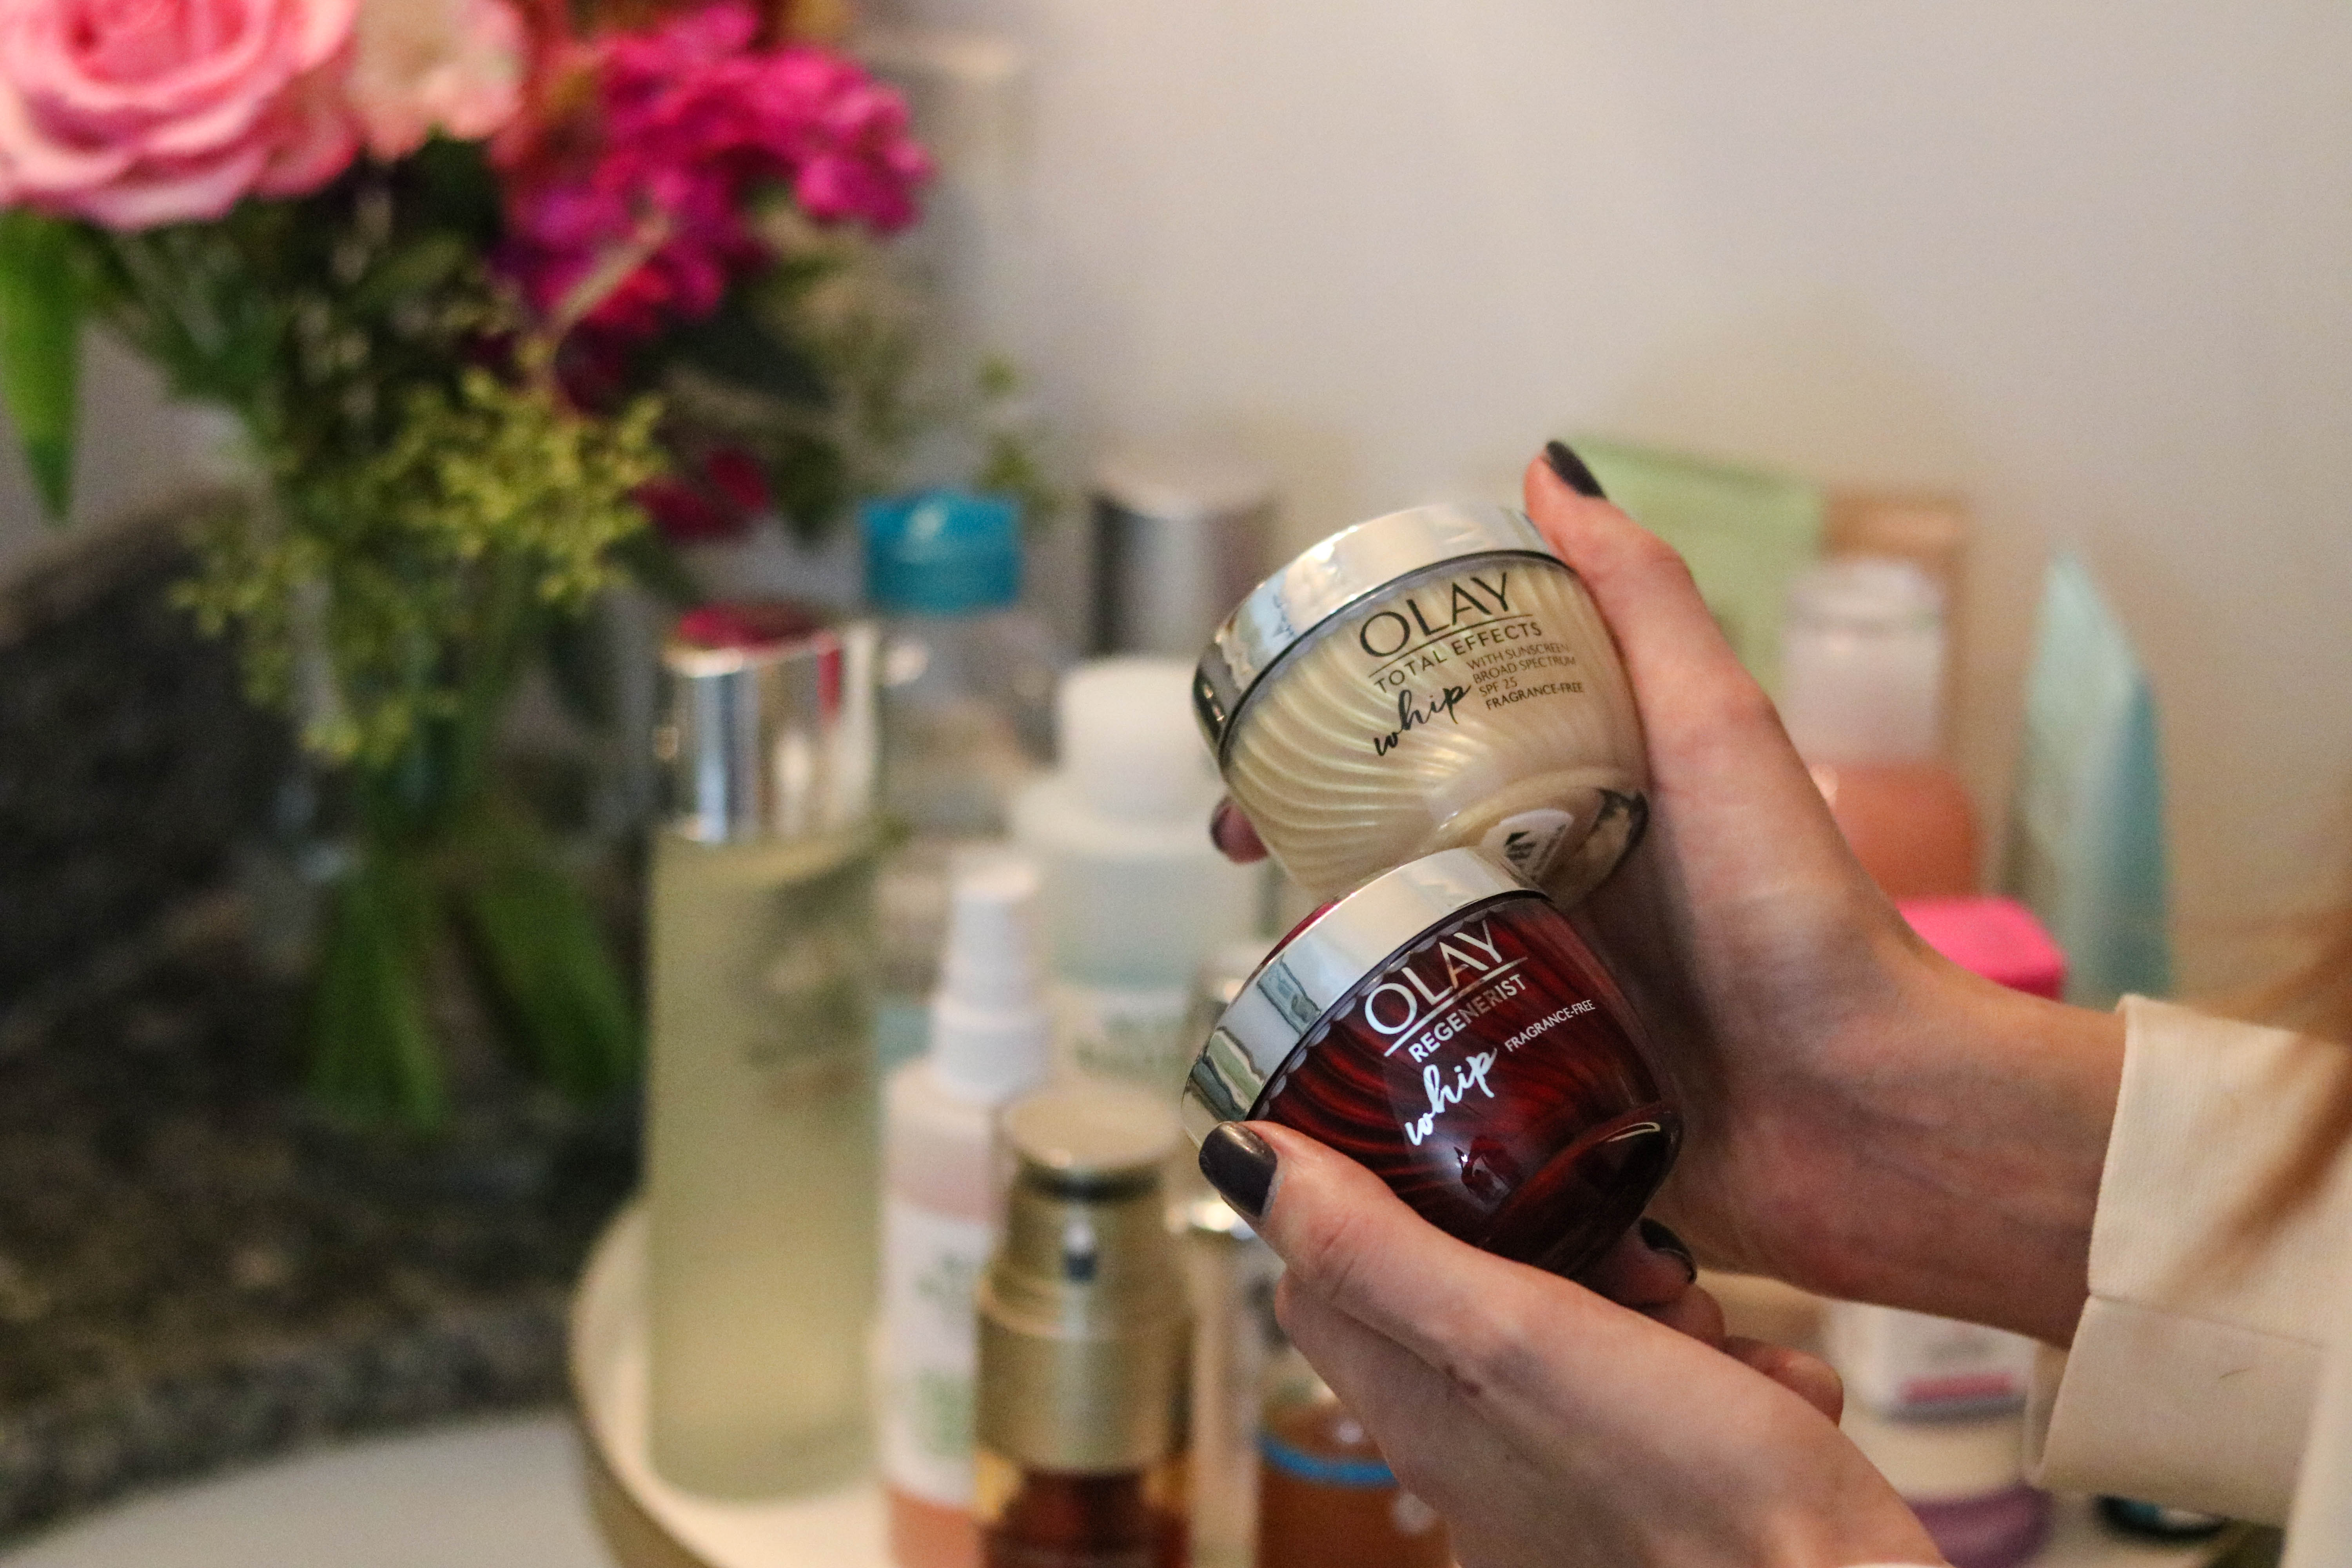 The *Correct* Order to Apply your Skincare Products - with Olay on Coming Up Roses